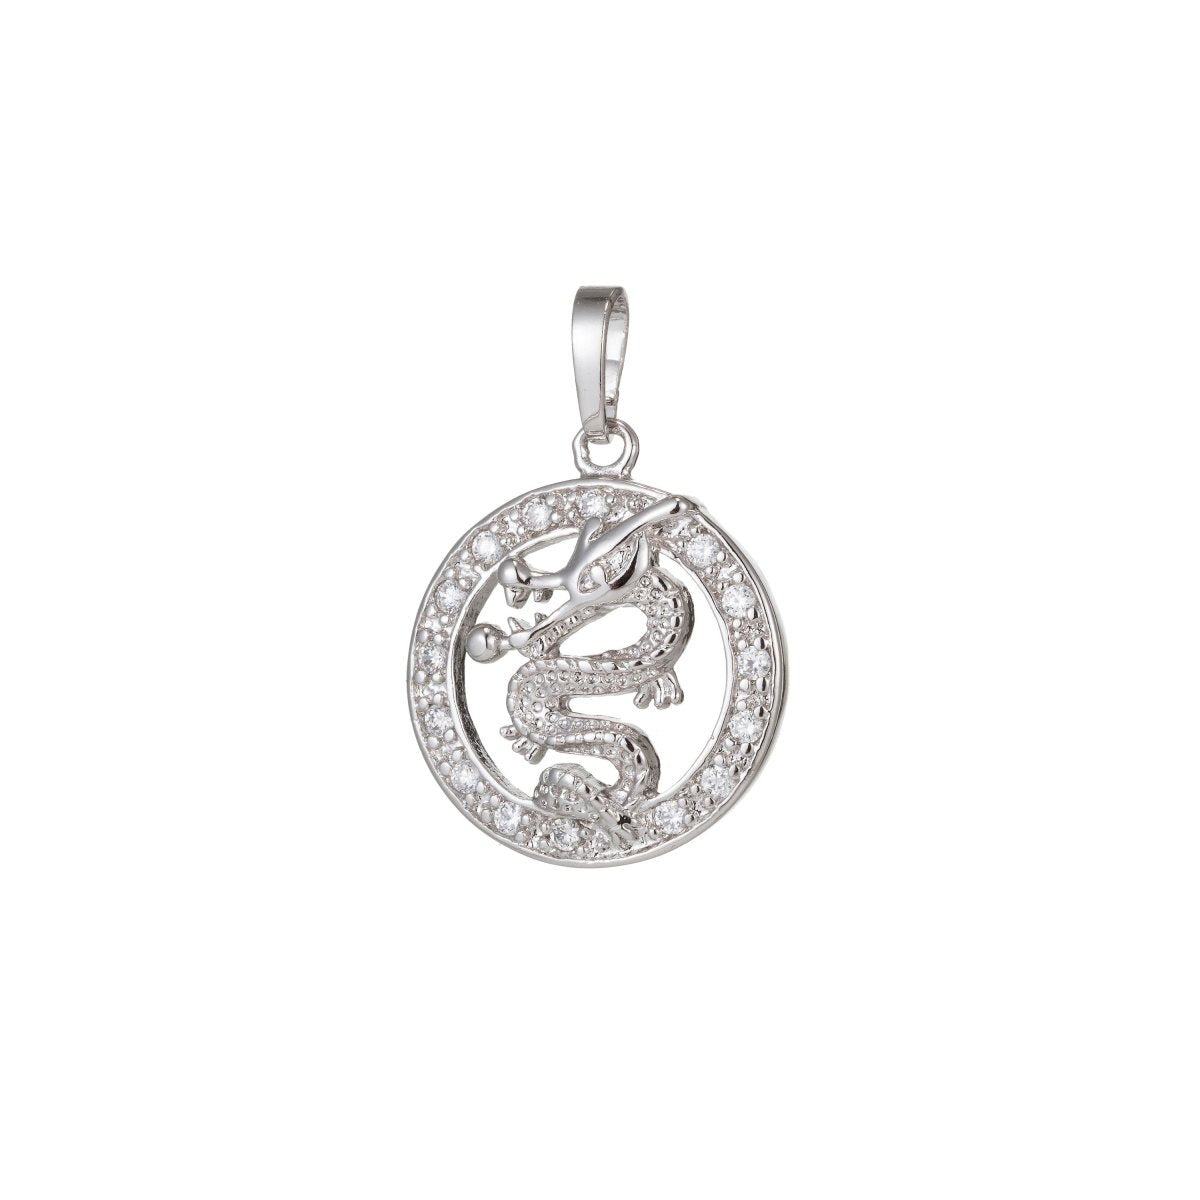 White Gold Filled Micro Pave CZ Dragon Pendant Charm, Dragon Pendant Charm, White Gold Filled Pendant, For DIY Jewelry I-510 - DLUXCA